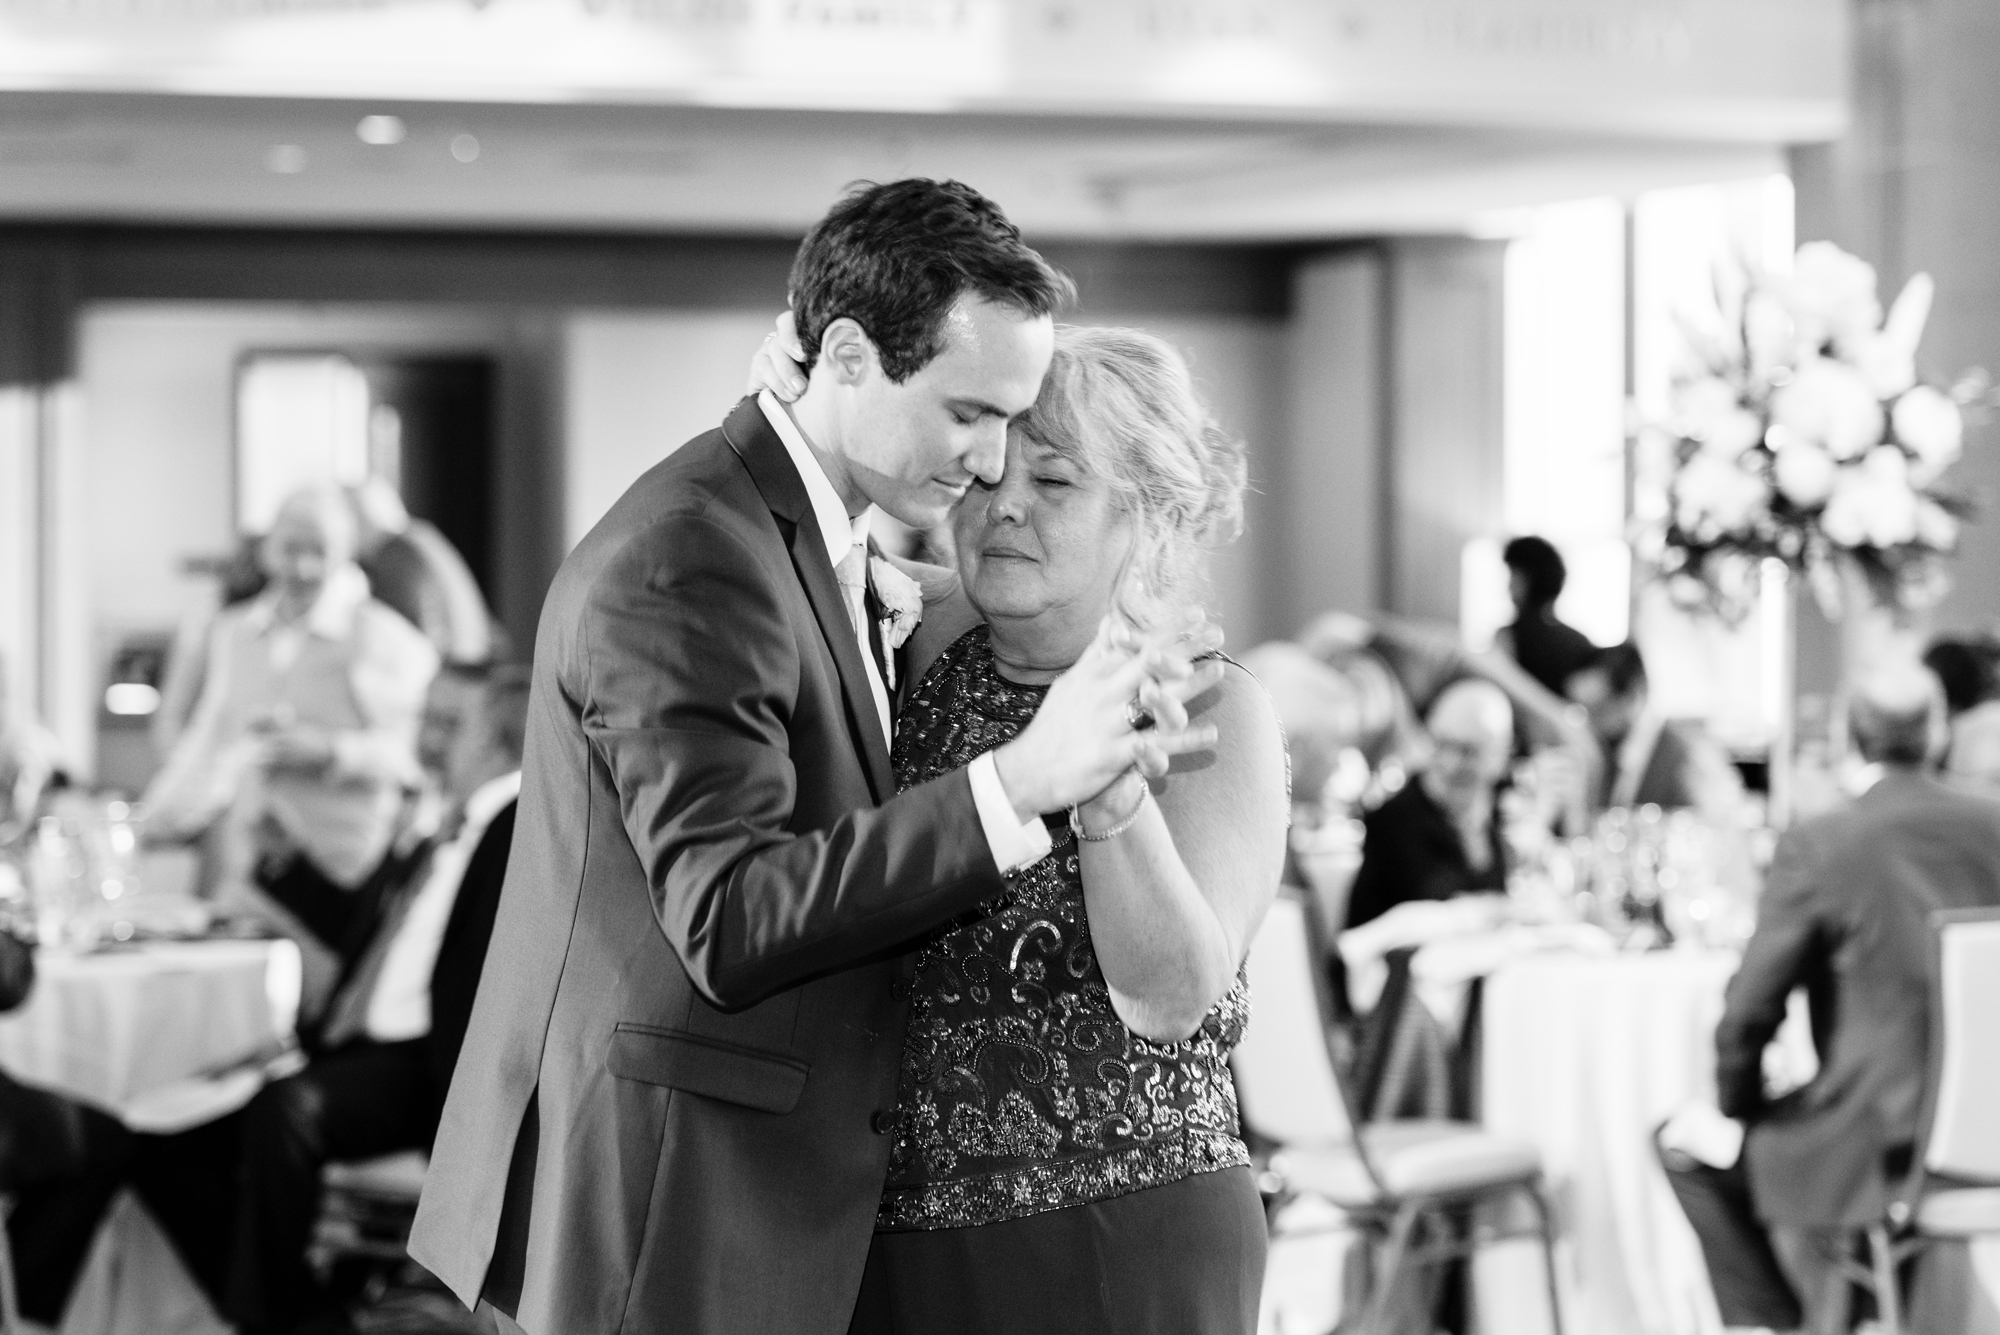 Mother Son first dance at a Wedding Reception at Dahnke Ballroom of Venue ND